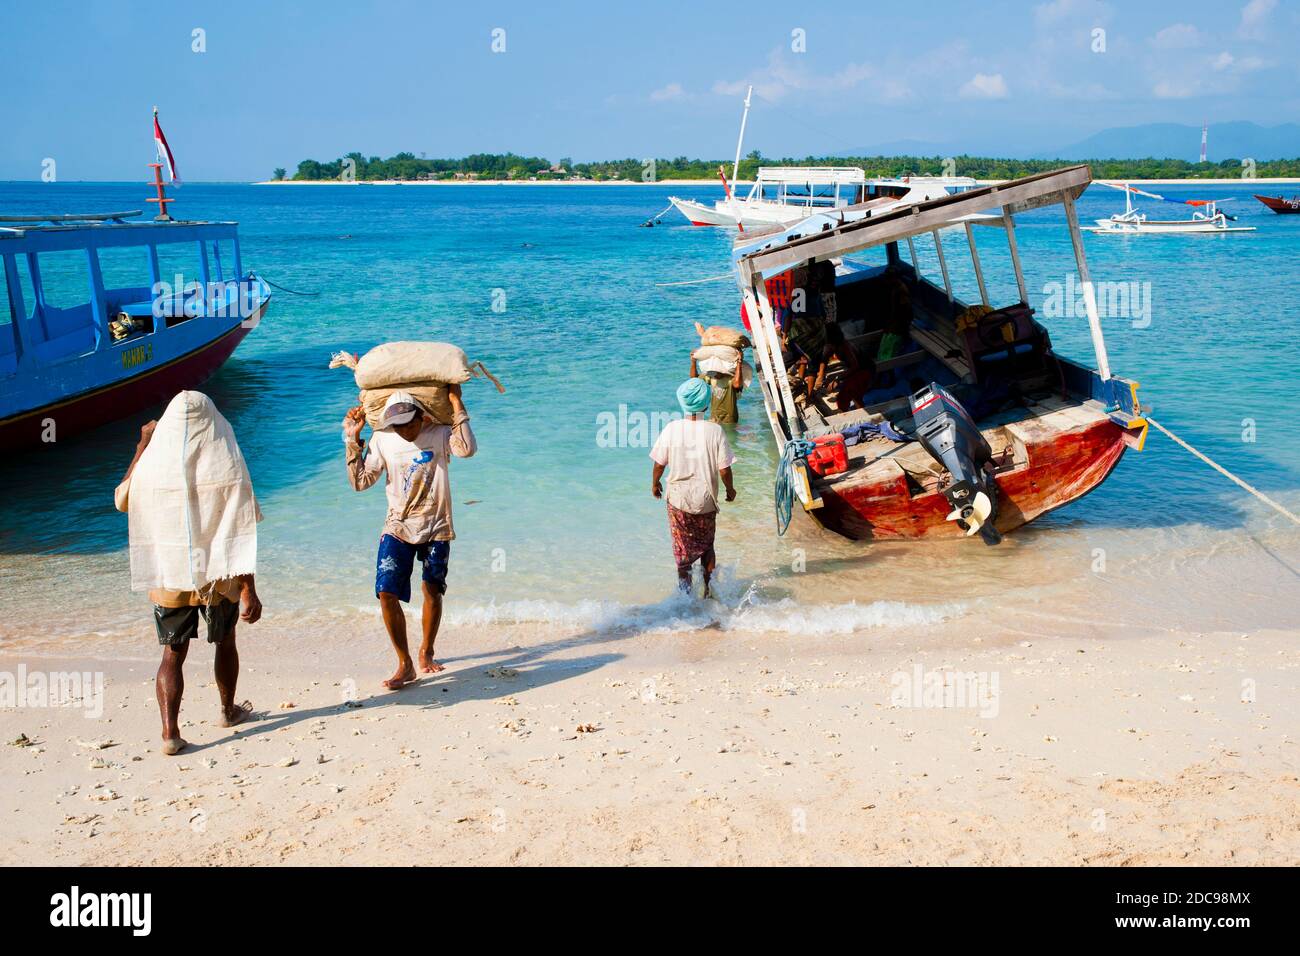 Morning Deliveries by boat on Gili Trawangan, a tropical island in the Gili Islands, Indonesia, Asia Stock Photo